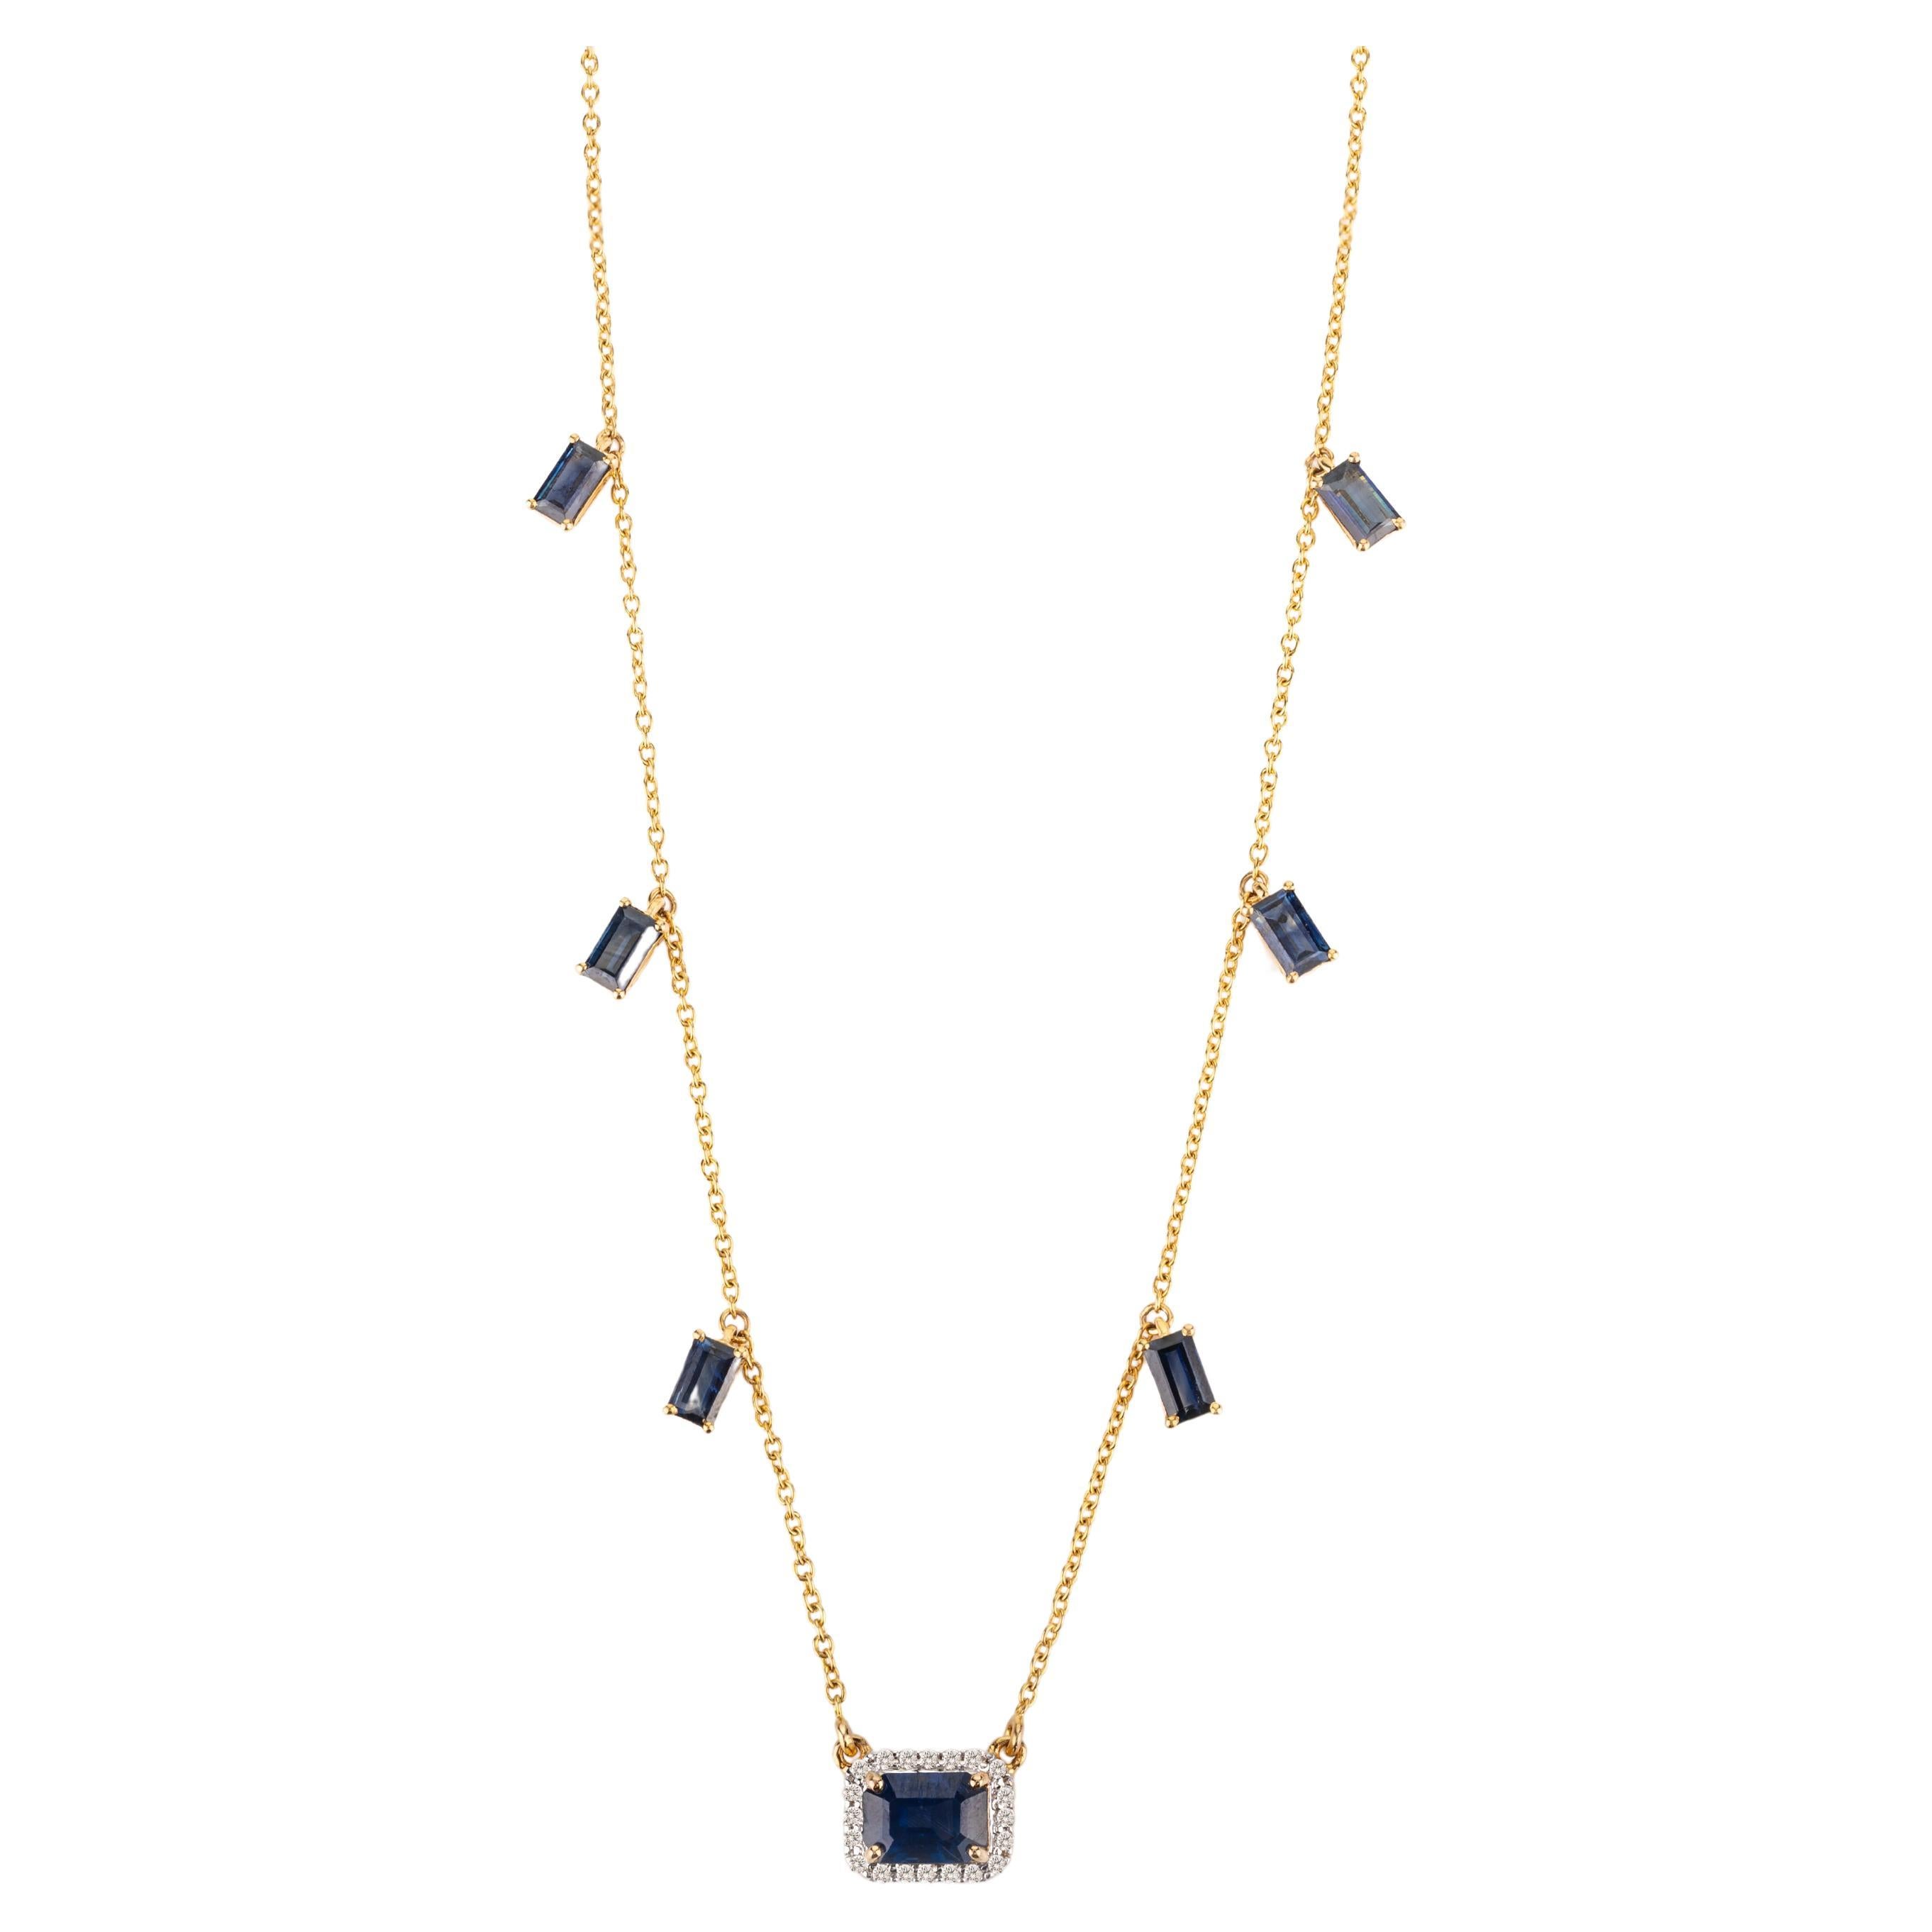 Dangling Blue Sapphire Diamond 14k Yellow Gold Chain Necklace Gift for Her